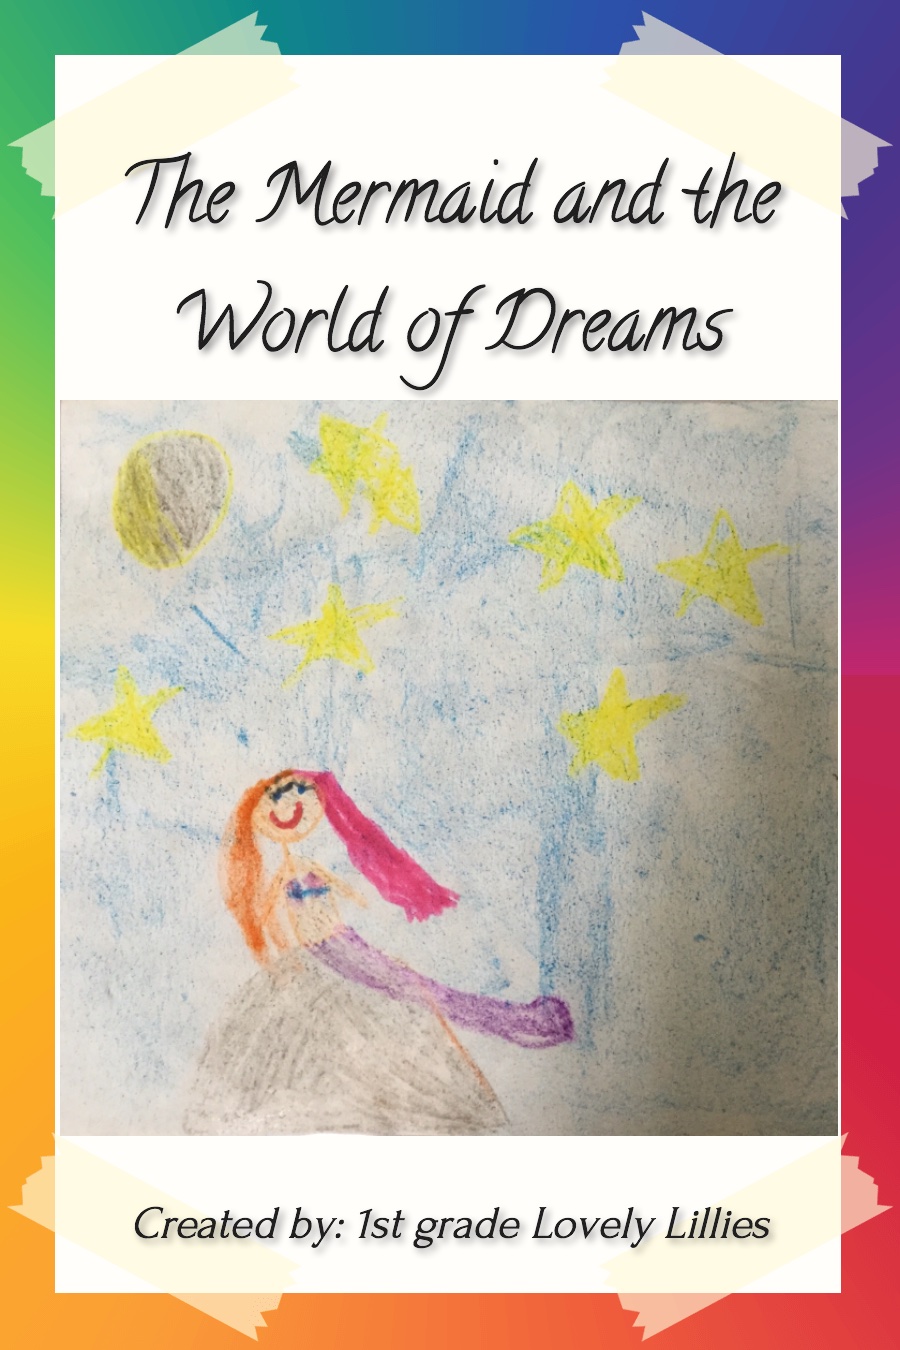 Mermaid and the World of Dreams by Redwood City – July 29 – 1st grade